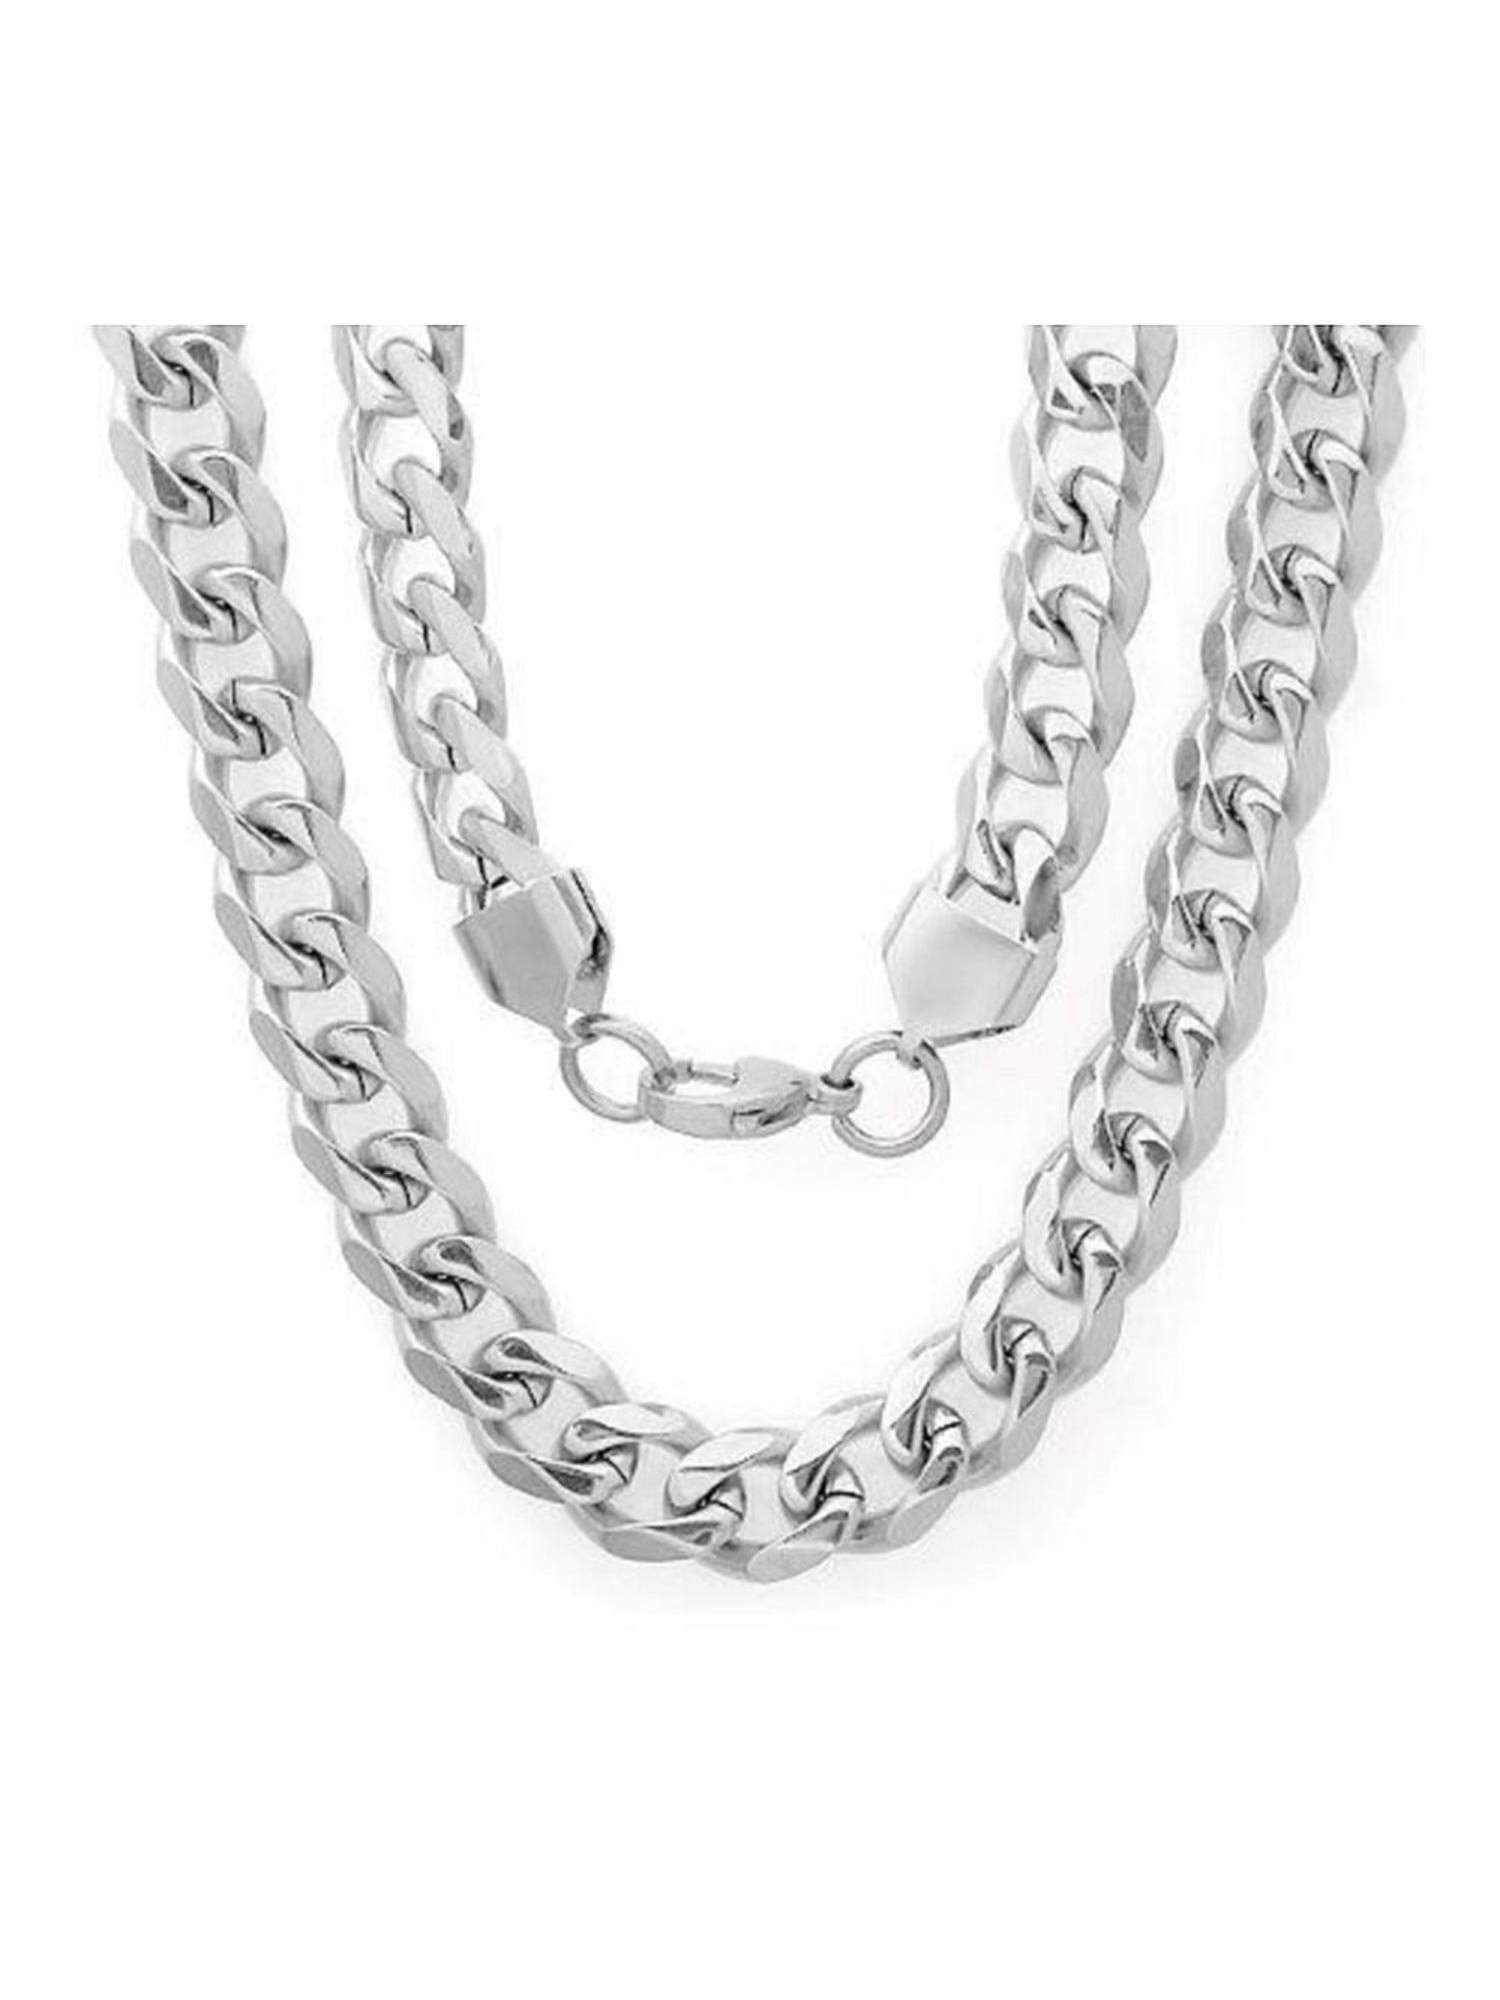 with Secure Lobster Lock Clasp 20mm Jewel Tie 925 Sterling Silver 20in Black Ovals Heavy Link Necklace Chain